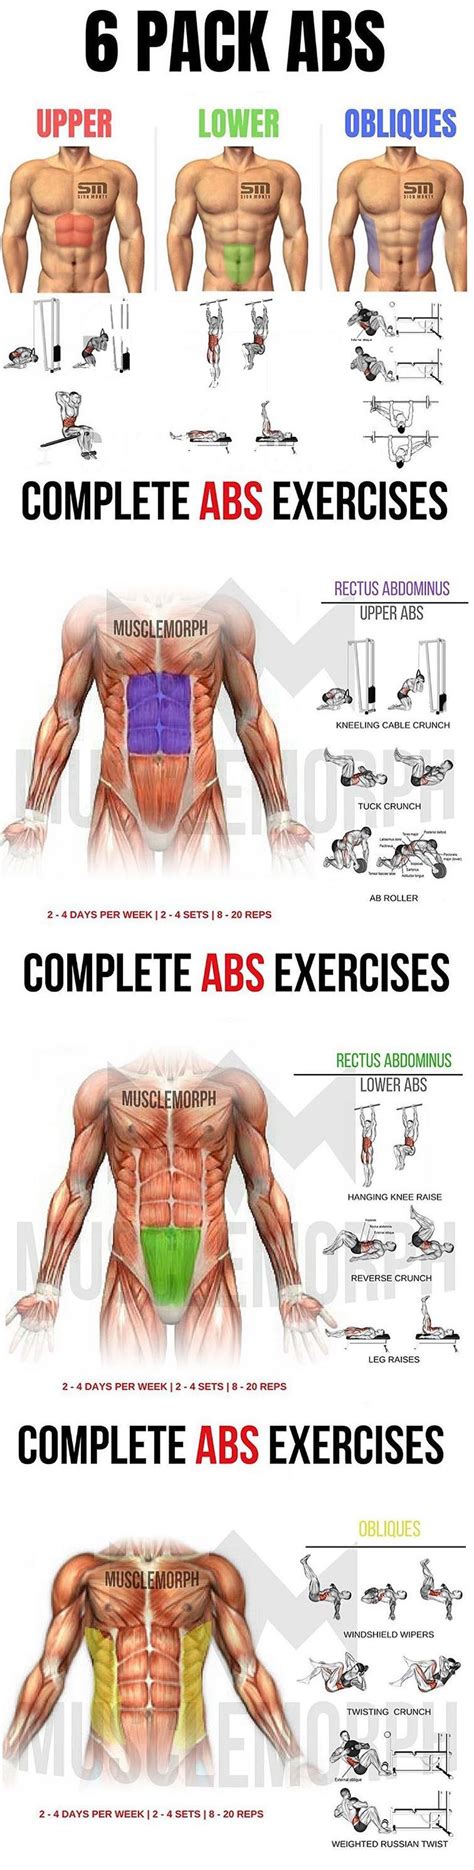 Abs Workout Routines Pilates Workout Core Workout Gym Workouts Workout Plan Fitness And